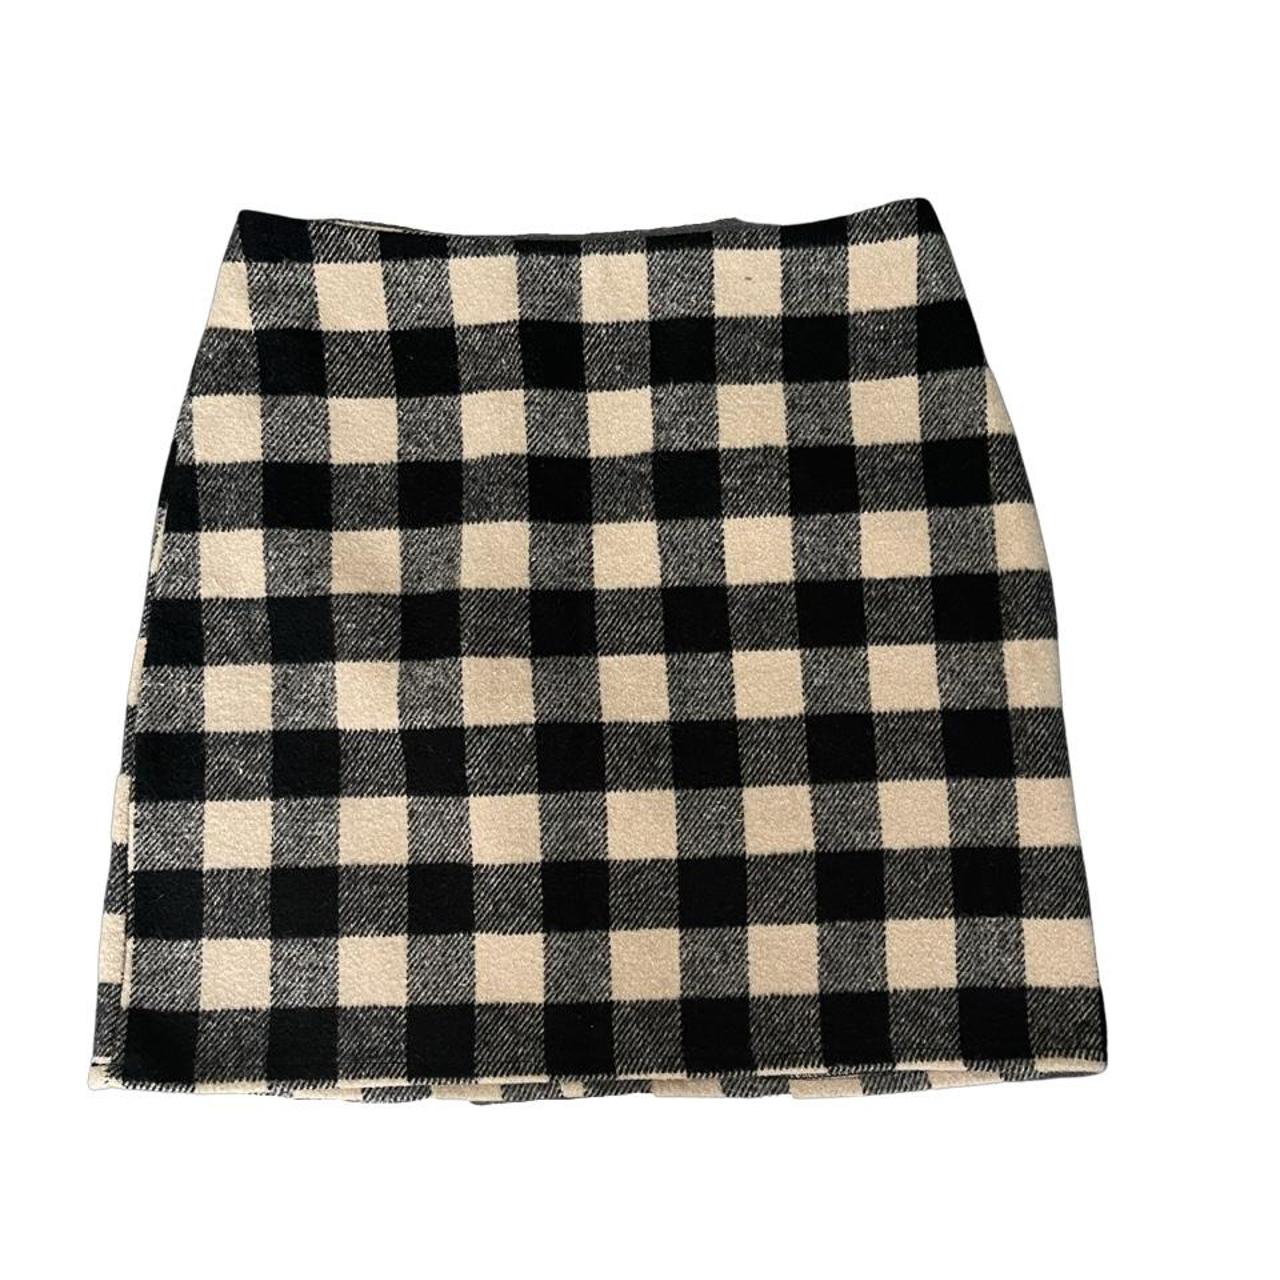 Cute fuzzy checkered plaid skirt from Primark.... - Depop